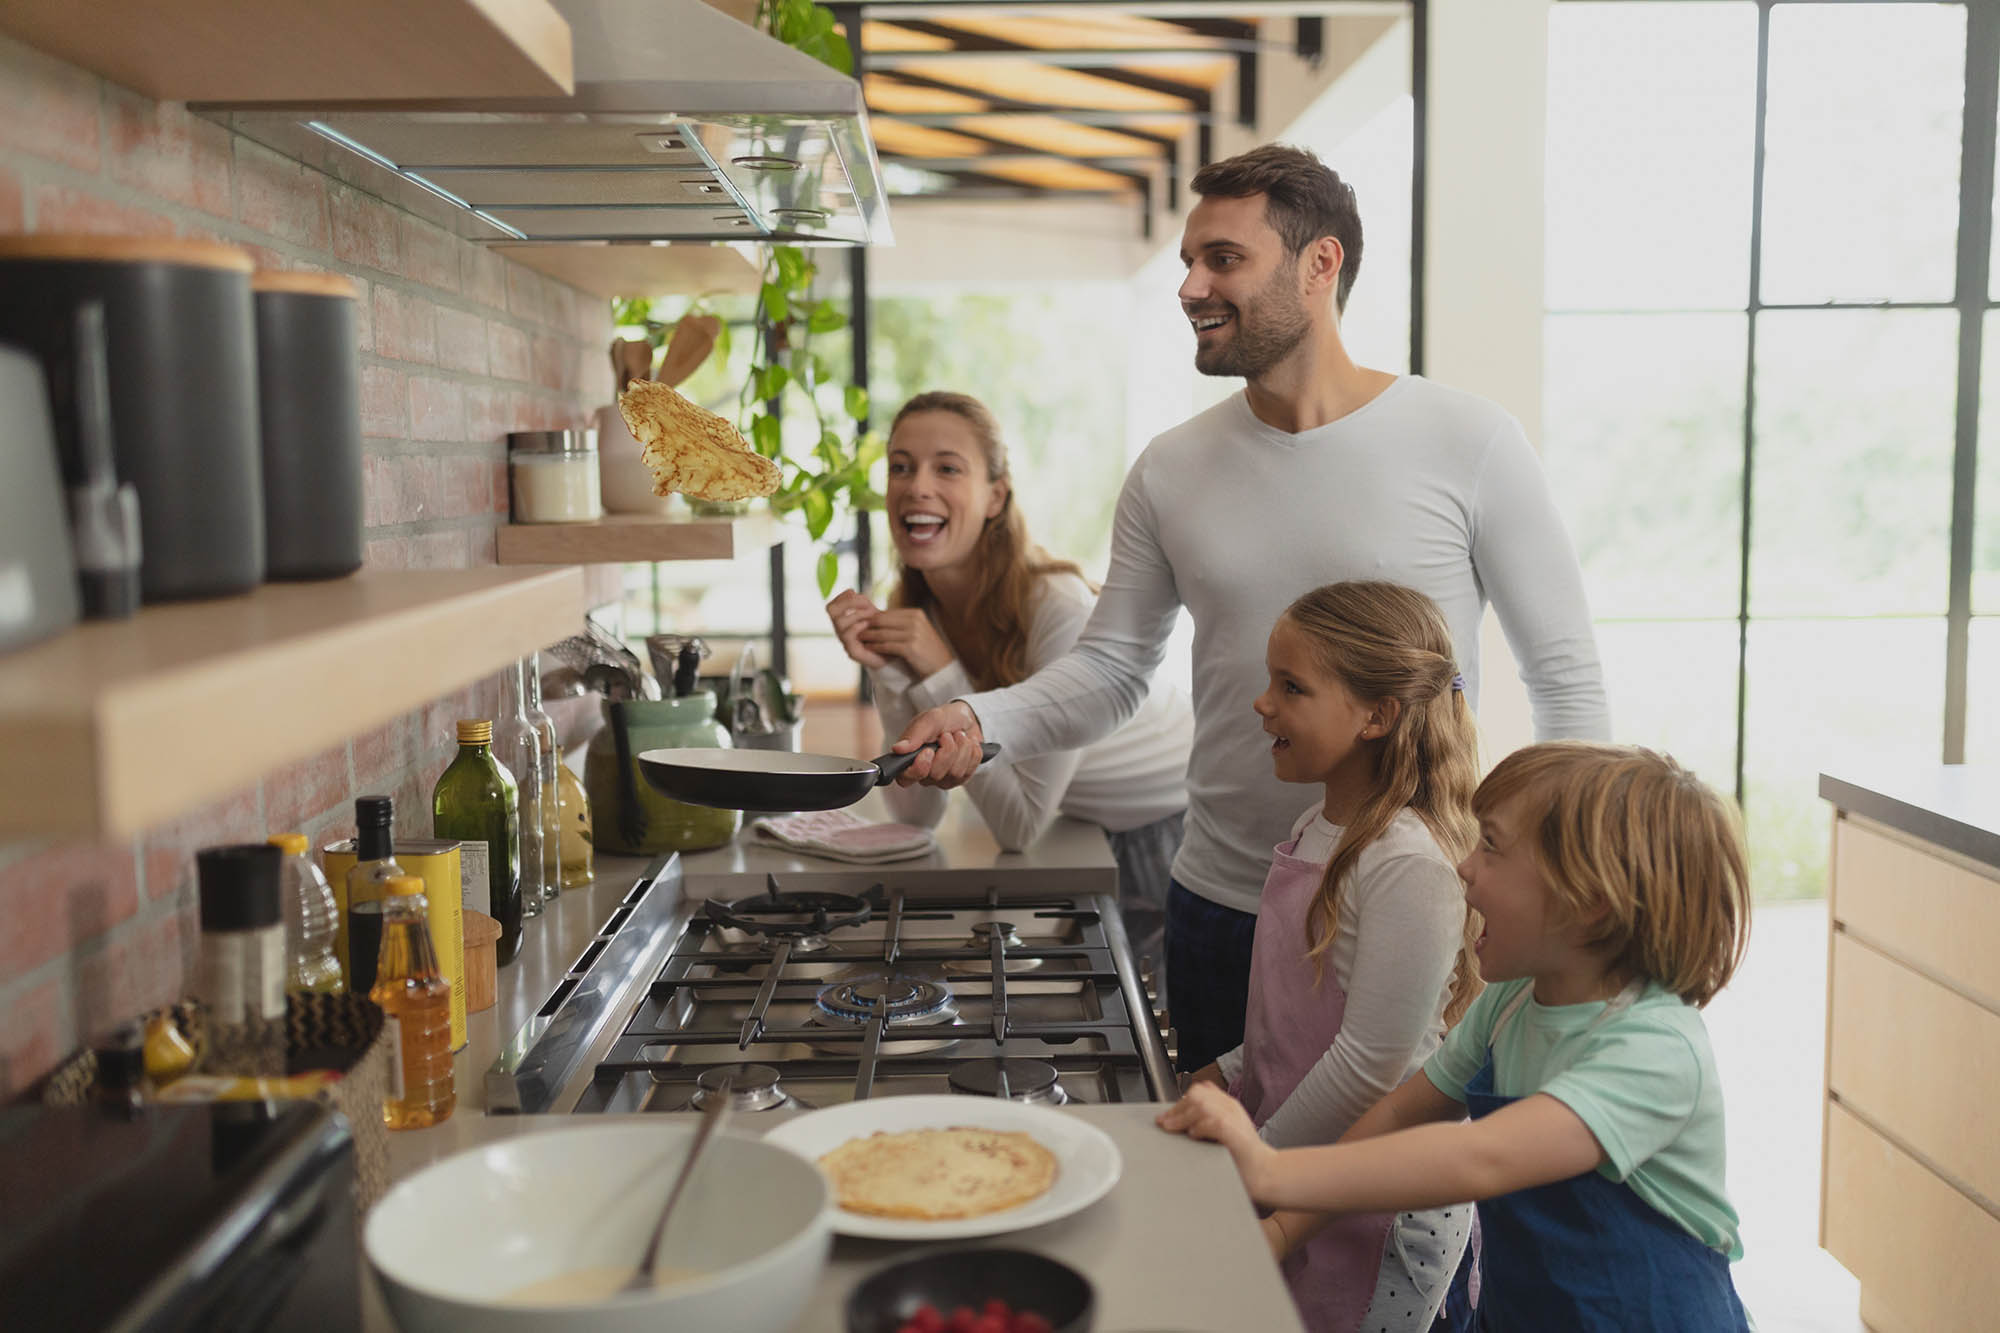 Family Preparing Food In Kitchen At Home